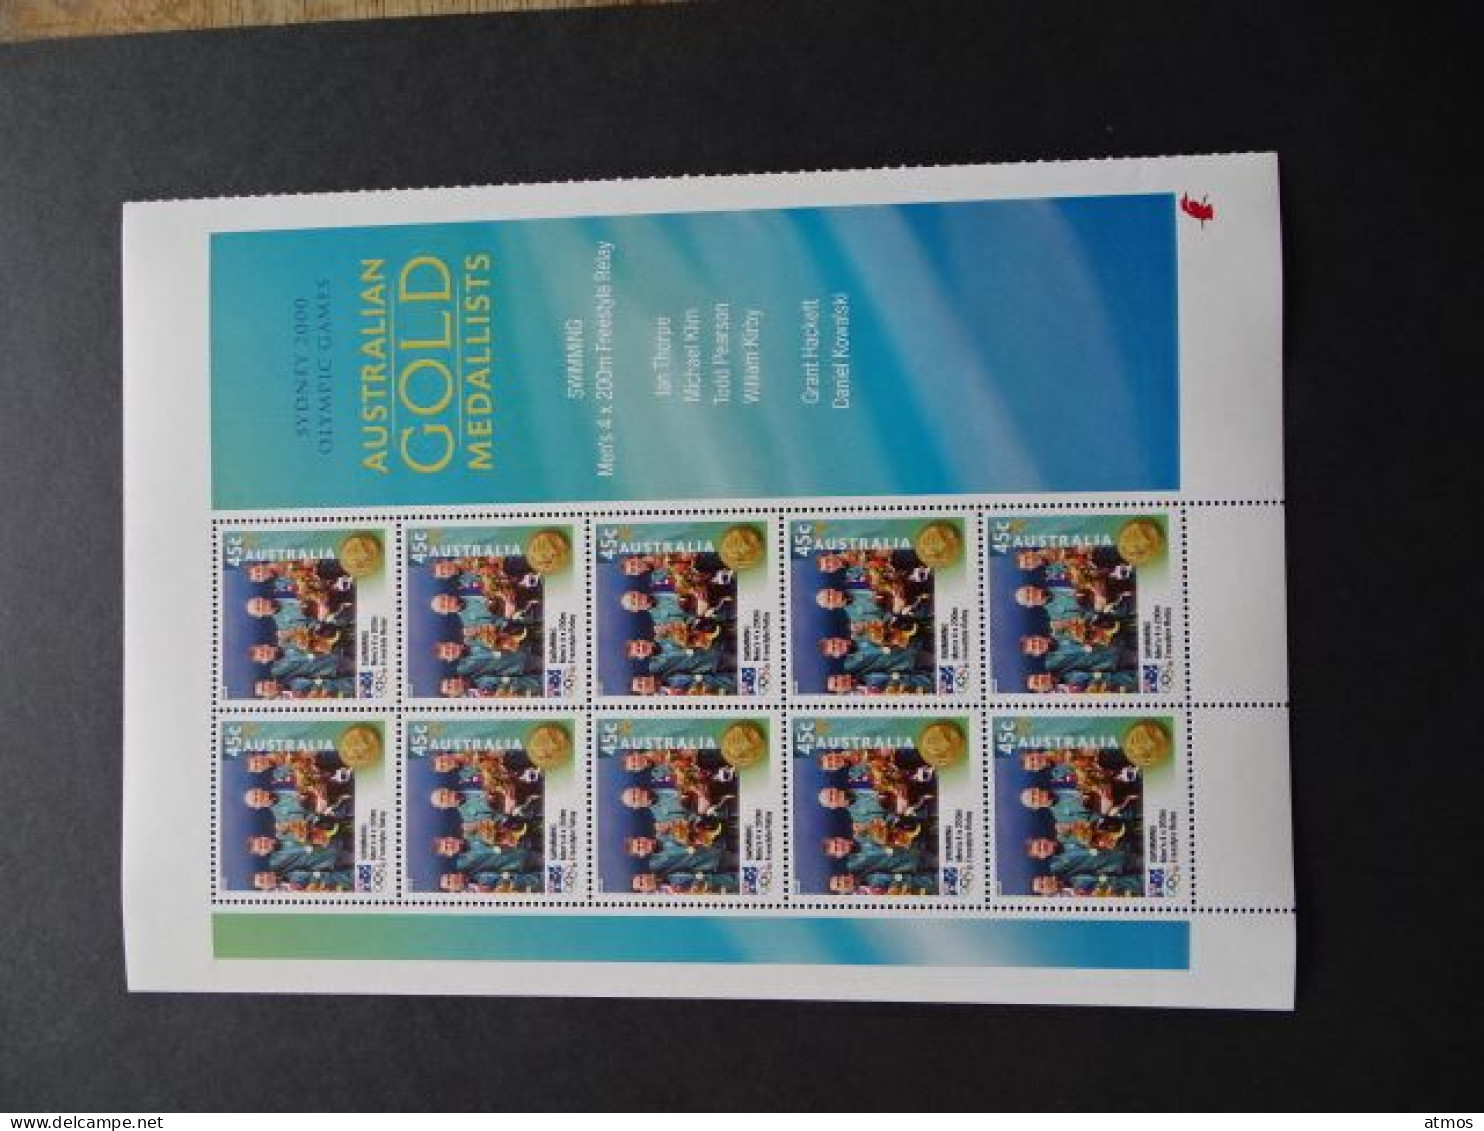 Australia MNH Michel Nr 1978 Sheet Of 10 From 2000 ACT - Nuevos